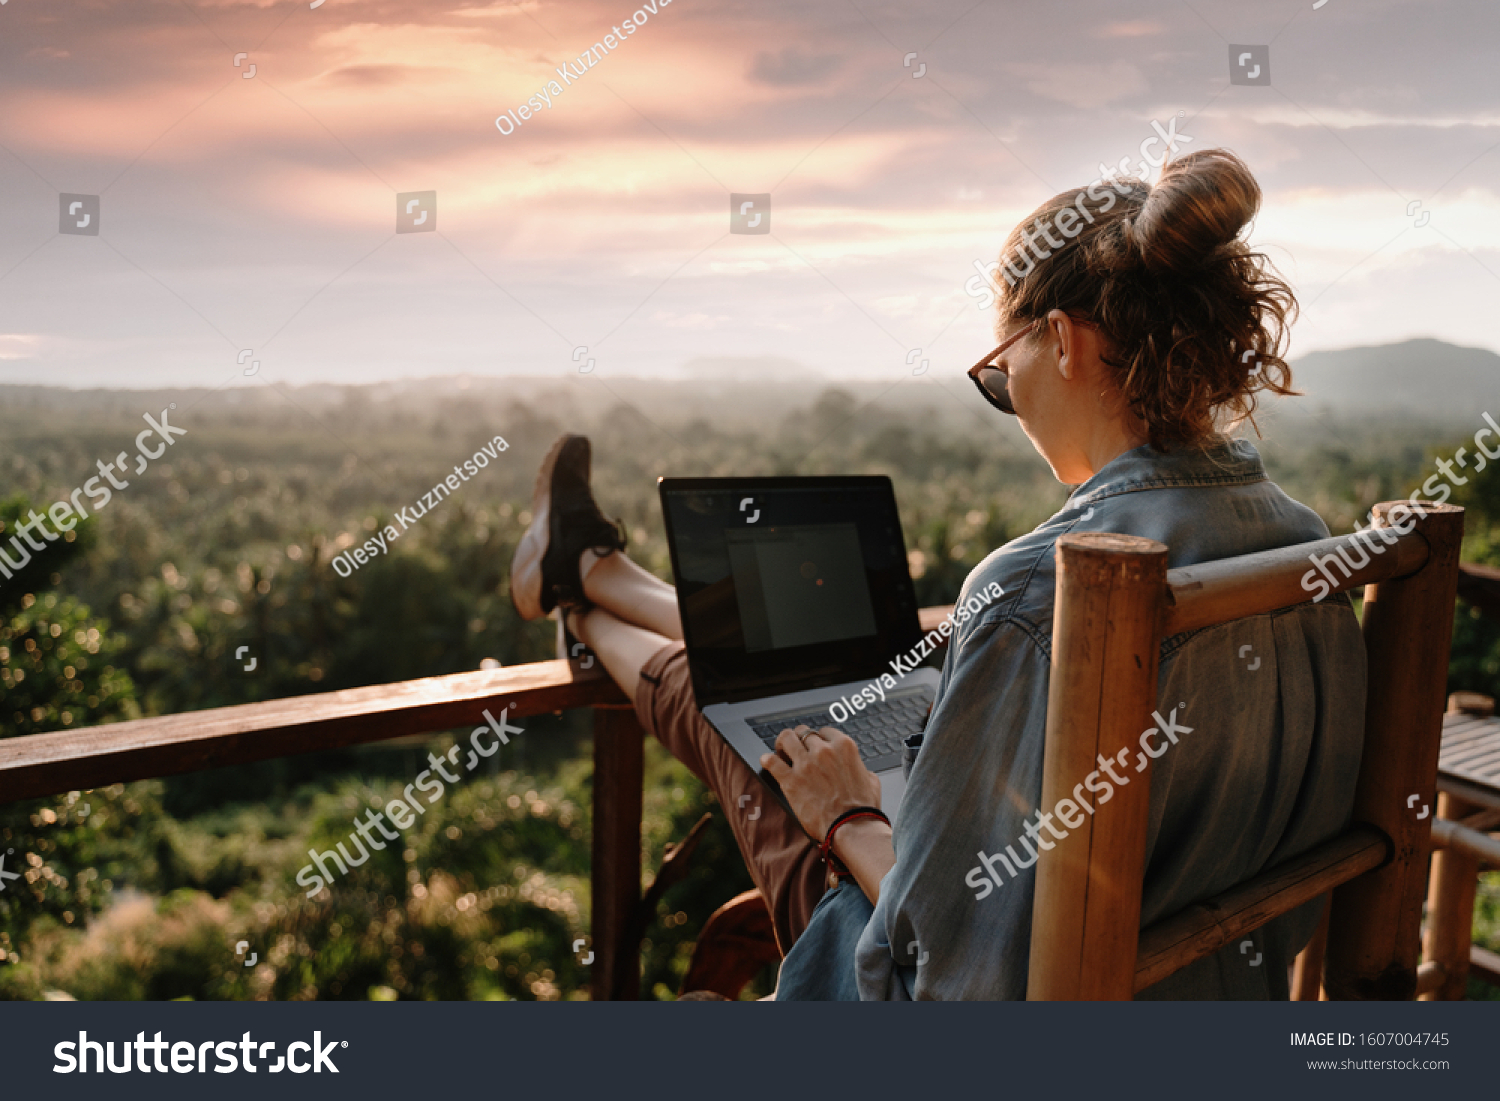 Young business woman working at the computer in cafe on the rock. Young girl downshifter working at a laptop at sunset or sunrise on the top of the mountain to the sea, working day. #1607004745